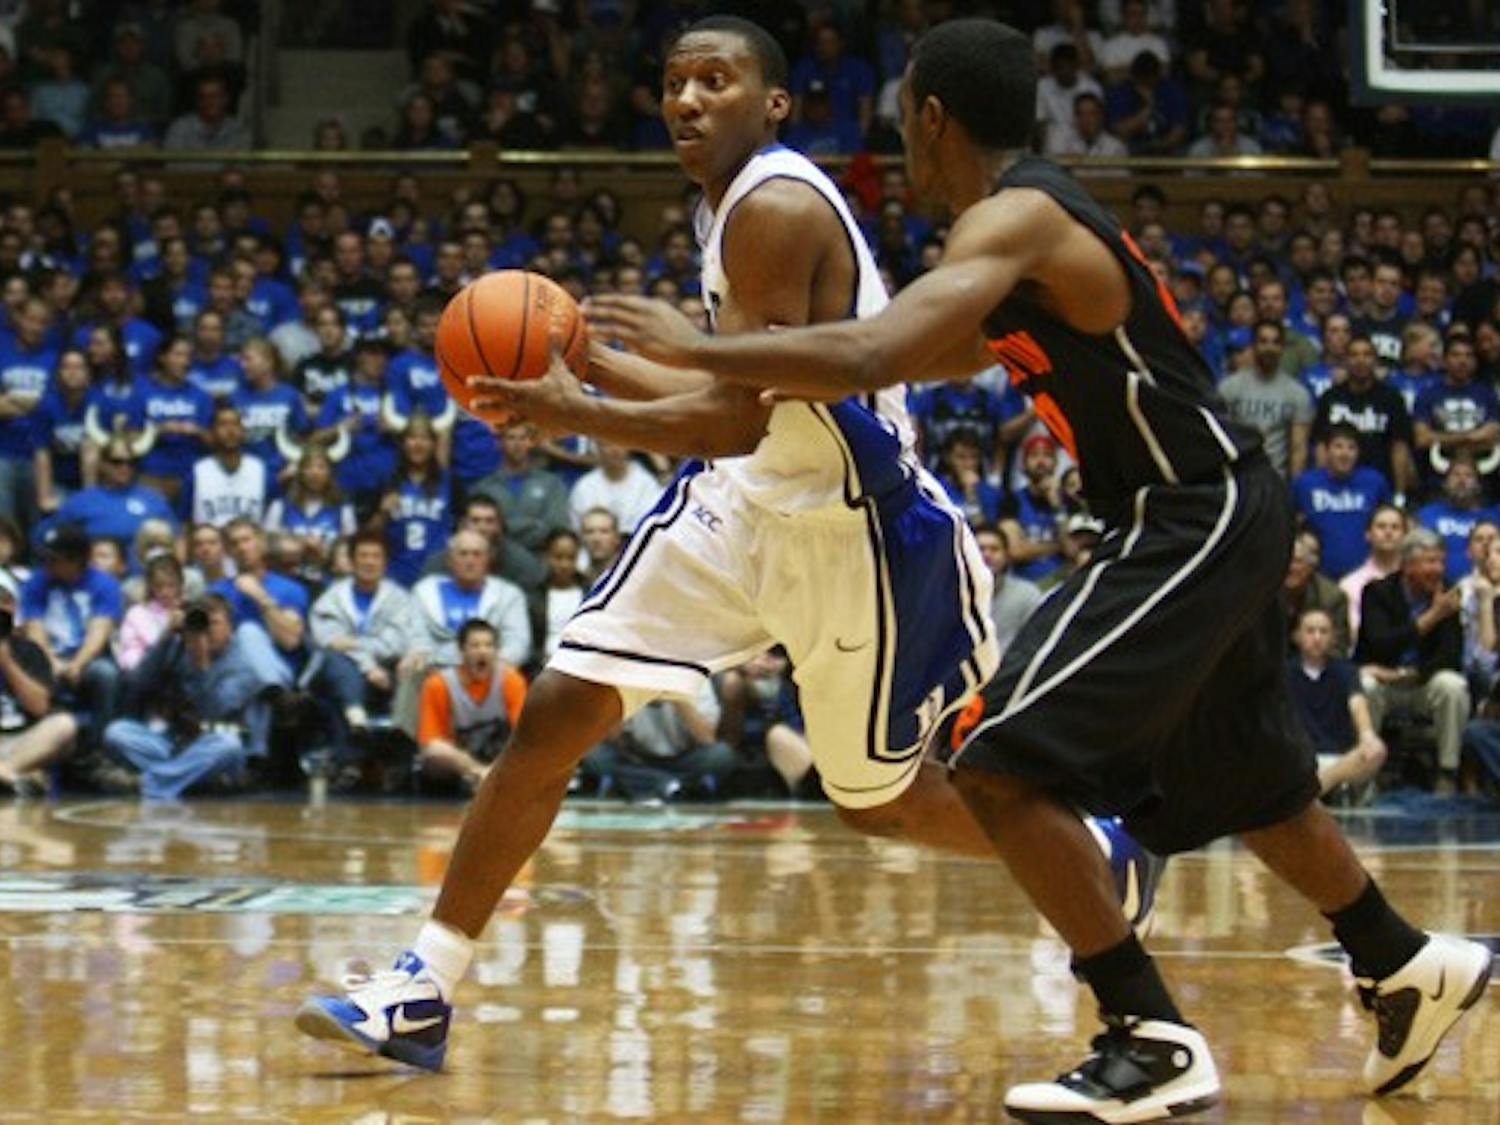 Nolan Smith led all scorers Sunday with 22 points.